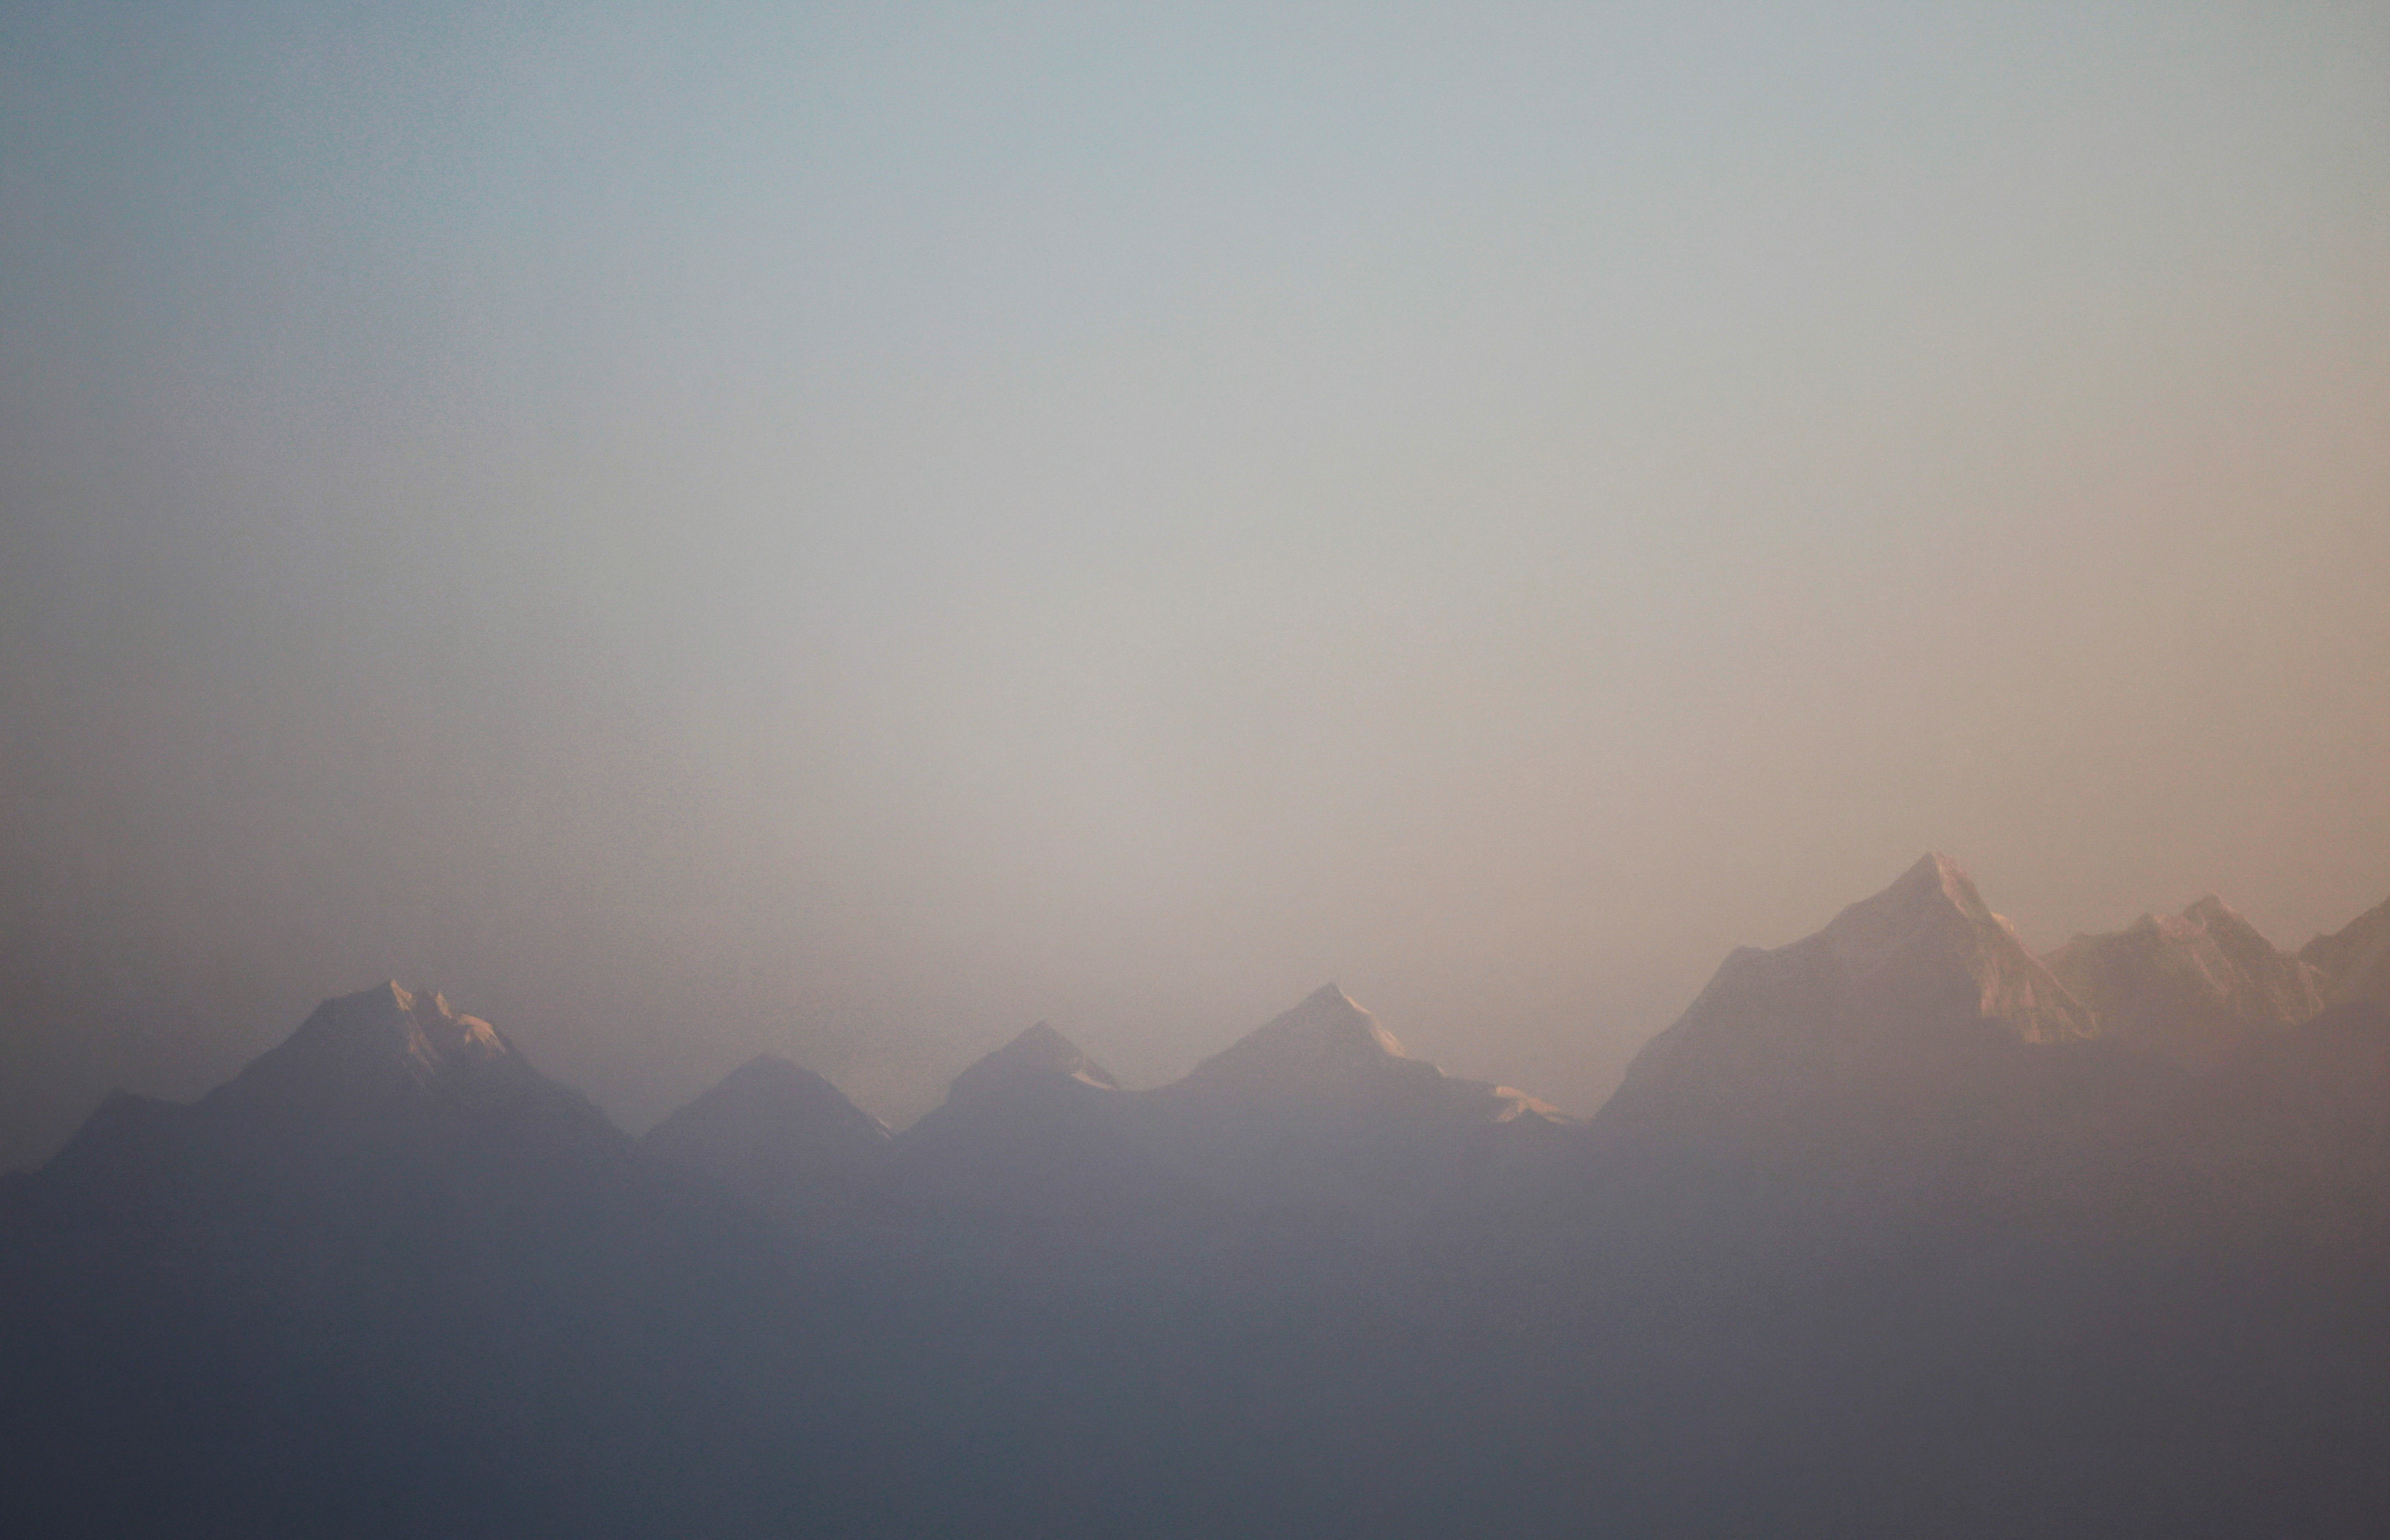 Mount Everest, the world highest peak, and other peaks of the Himalayan range are seen during the sunrise from Ratnange hill in Solukhumbu